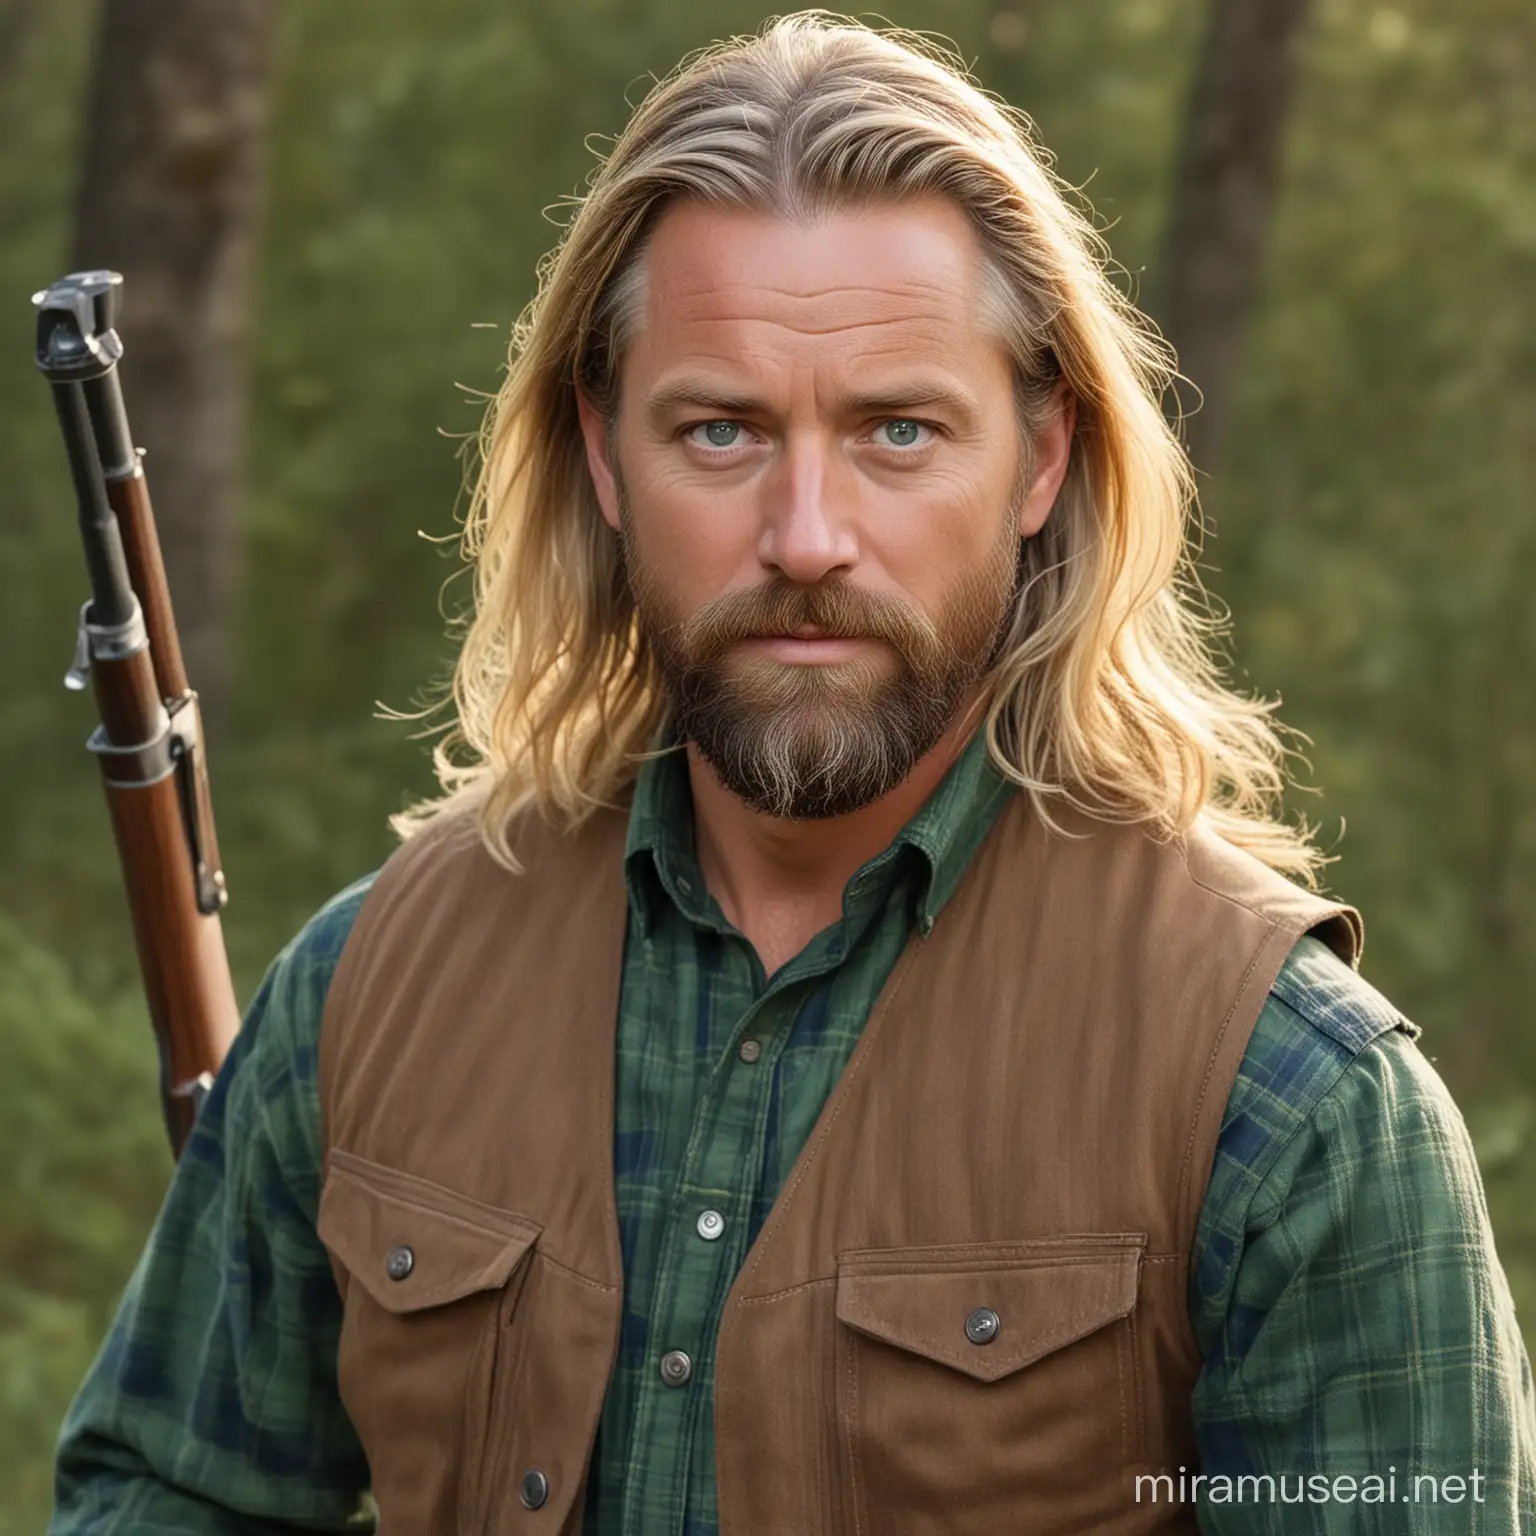 Rugged Adventurous Man with Hunting Gear and Blond Hair